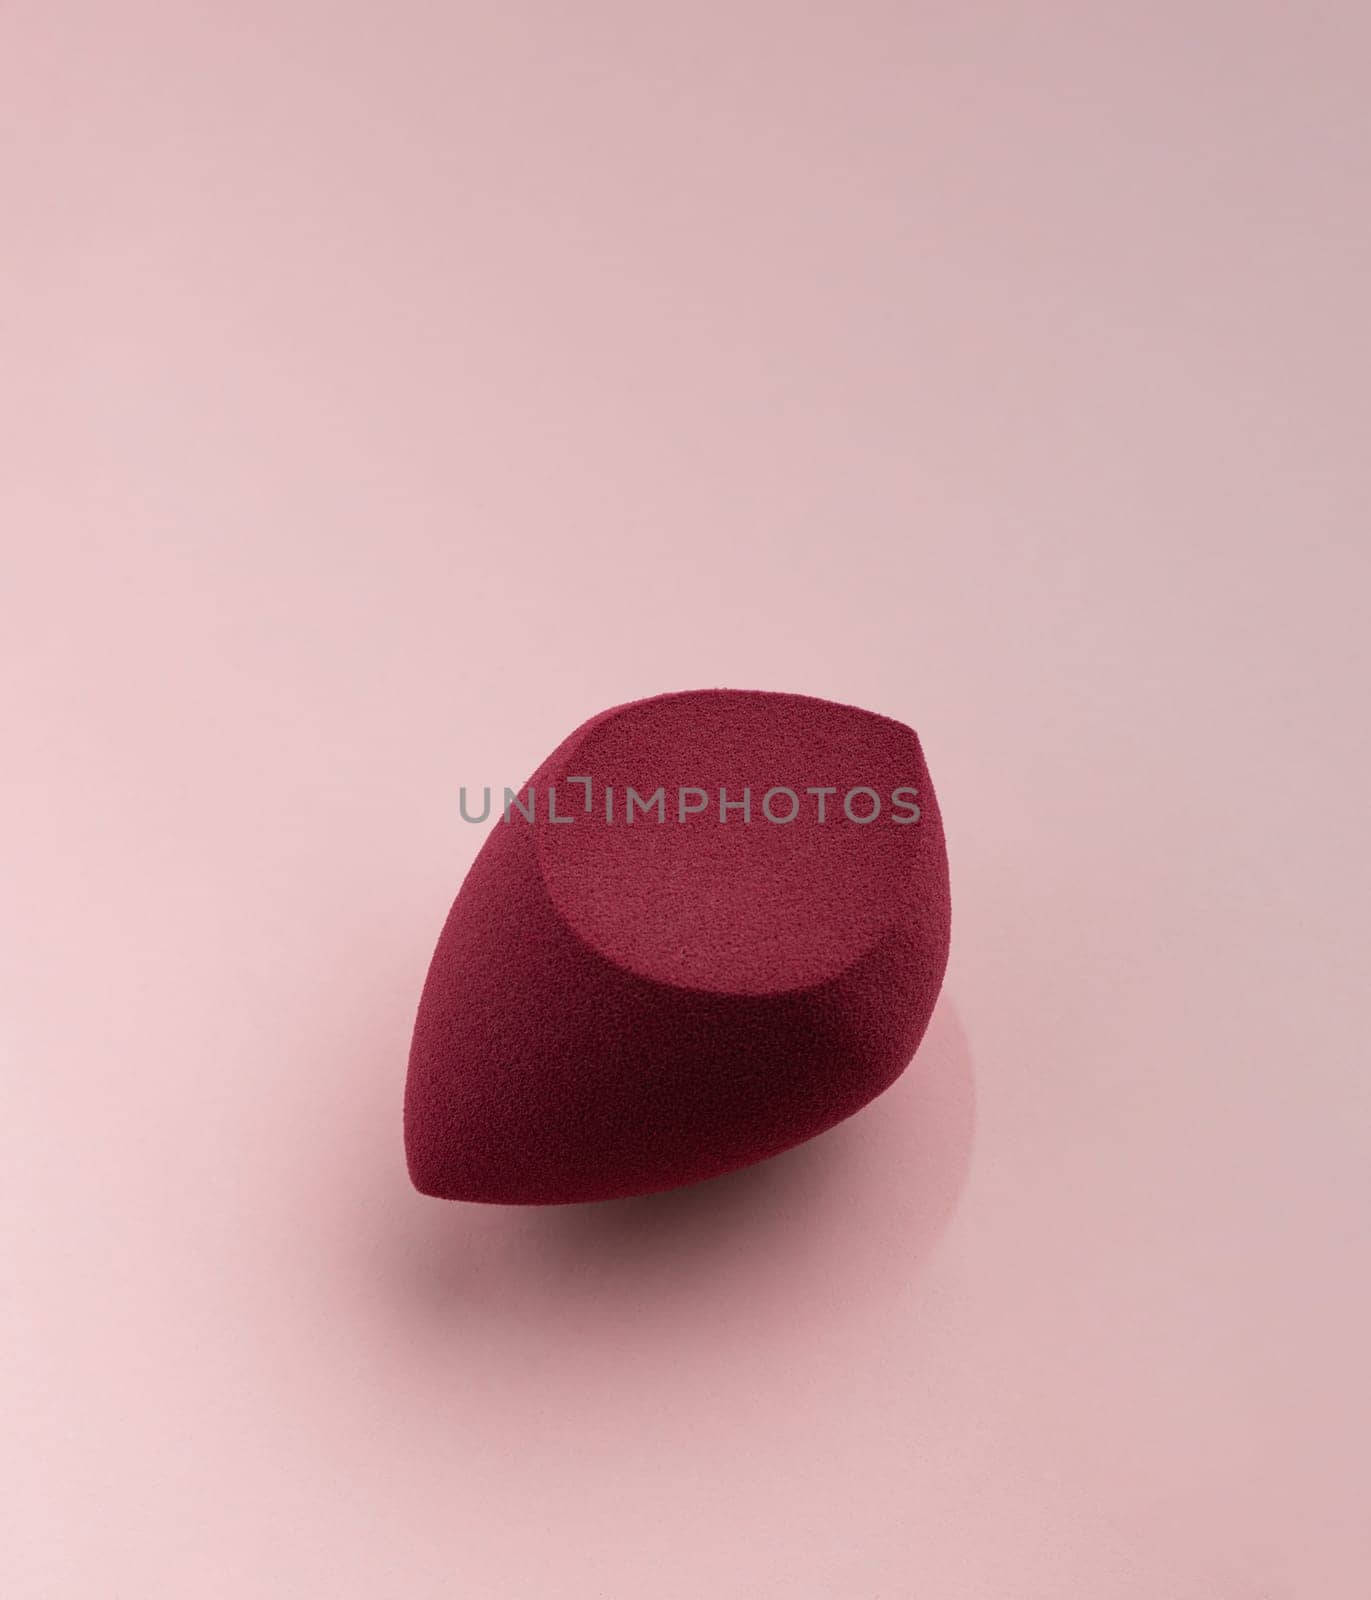 Red cosmetic sponge in the shape of an egg on a pink background by A_Karim